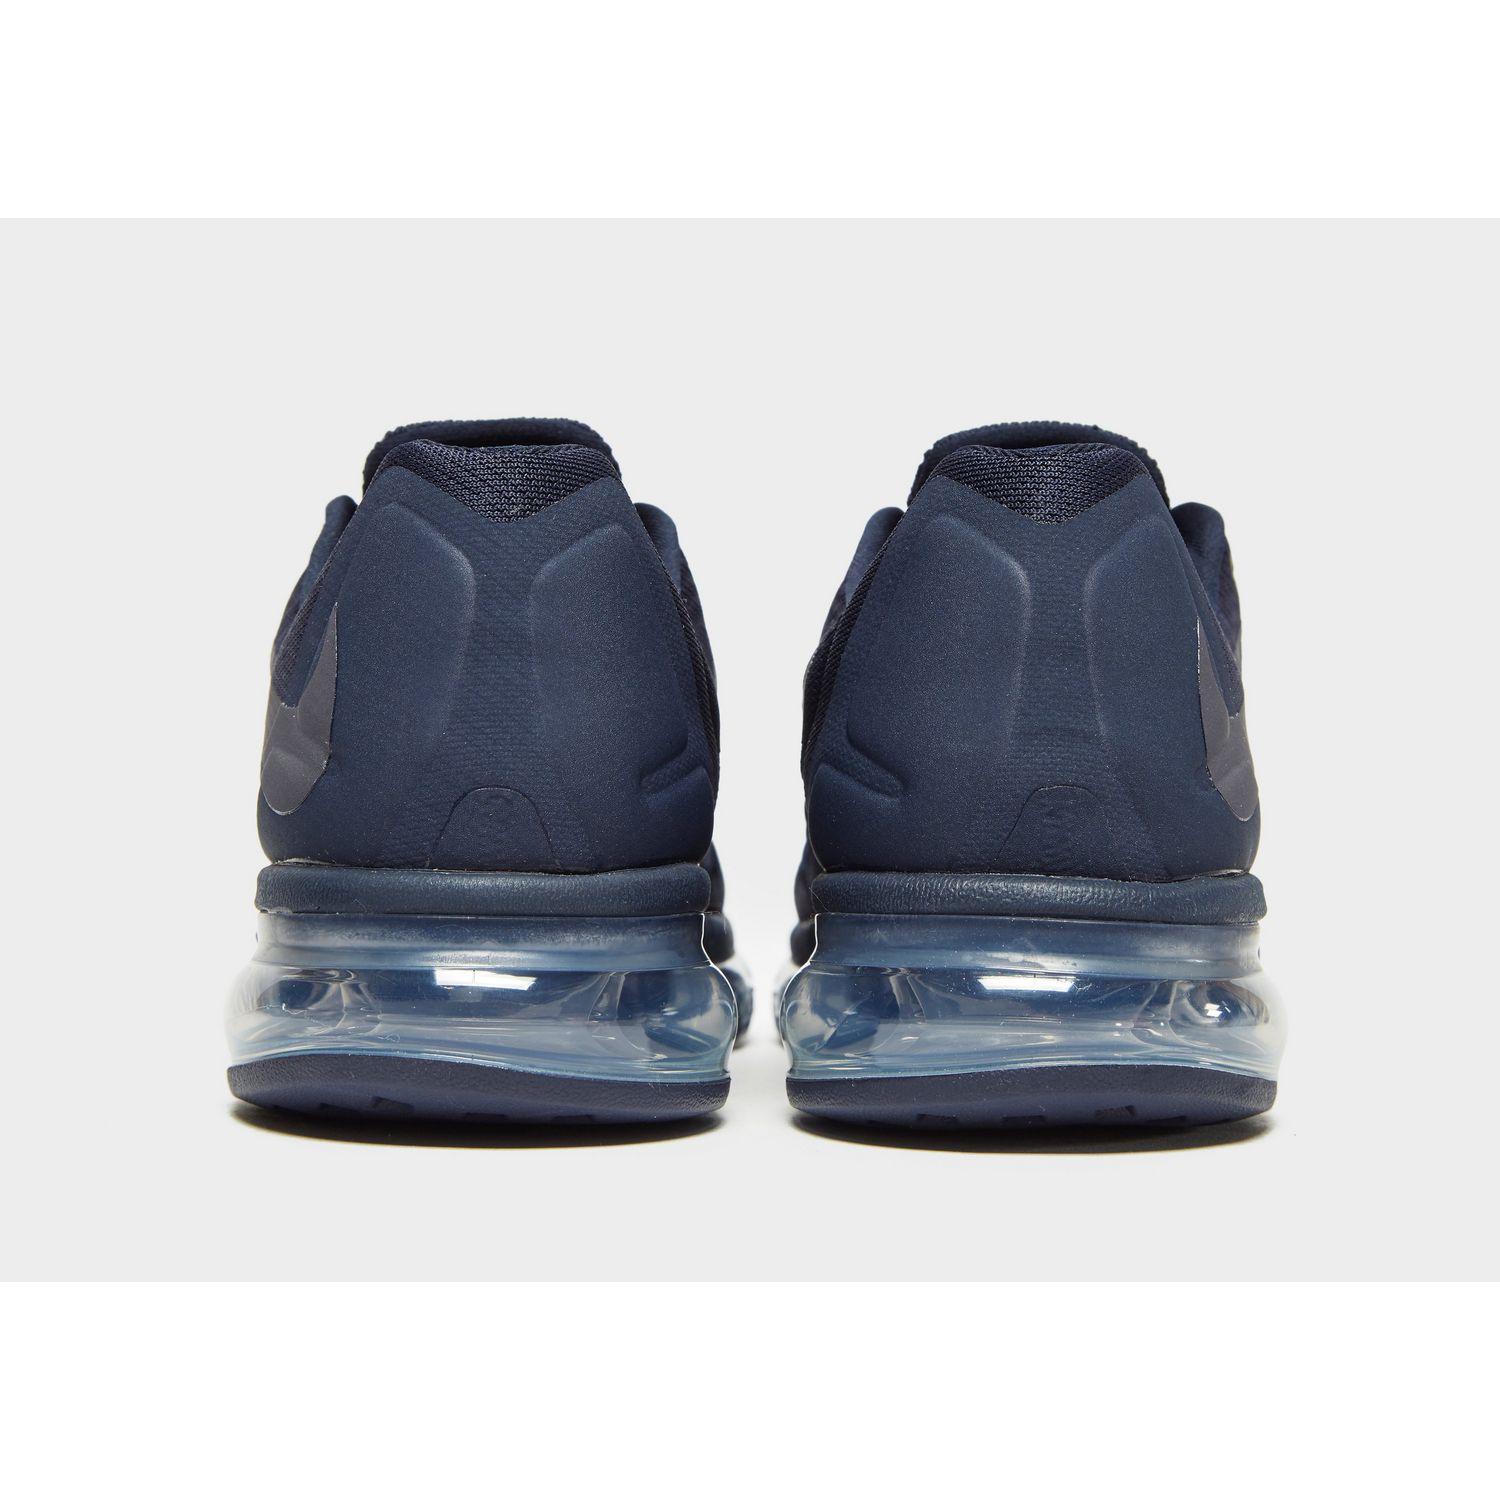 Nike Synthetic Air Max 2015 in Navy 